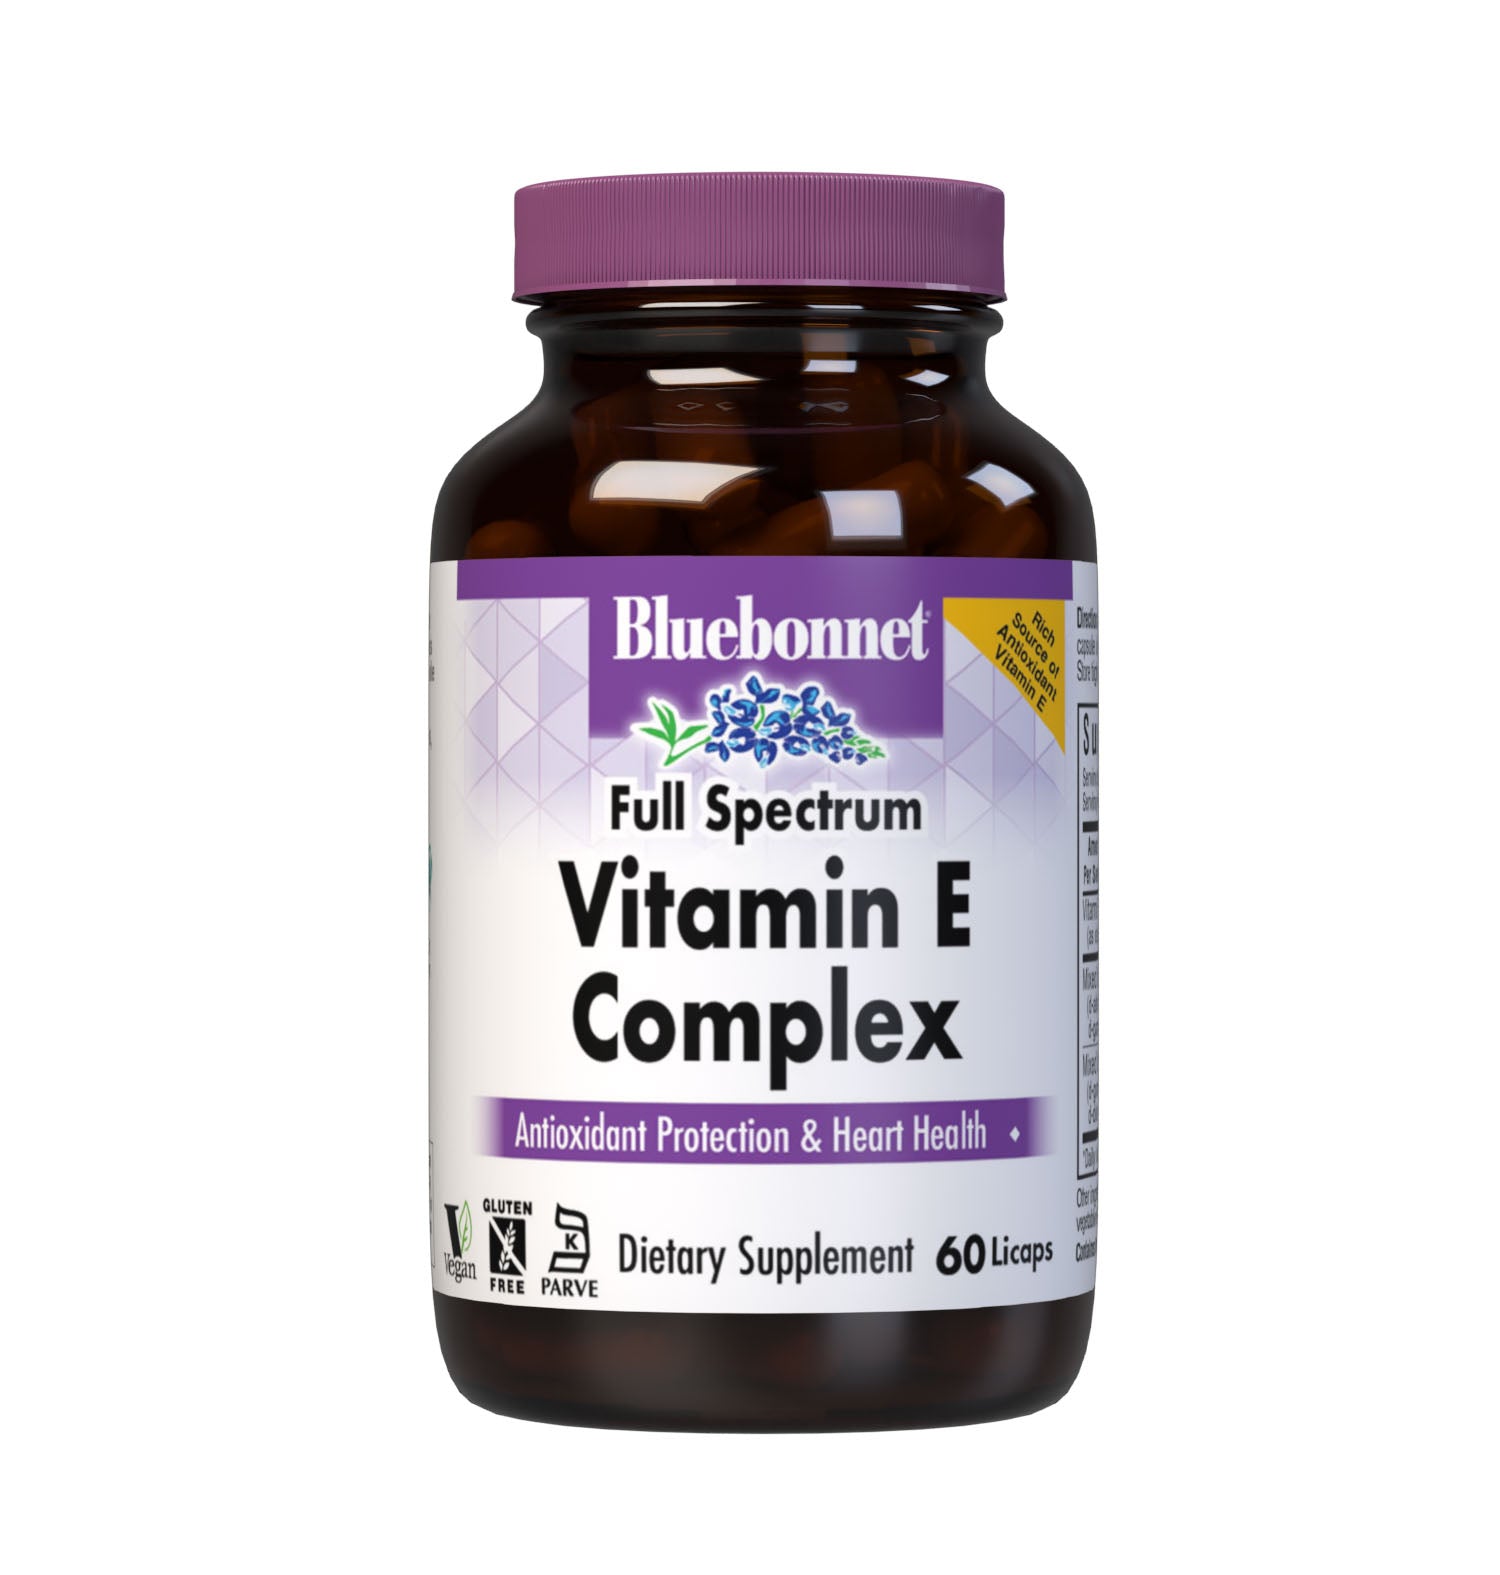 Bluebonnet’s Full Spectrum Vitamin E Complex 30 Licaps are specially formulated with d-alpha tocopherol and full spectrum tocopherol isomers (alpha, beta, delta and gamma) and tocotrienol isomers (alpha, beta, delta and gamma) from sustainably sourced, non-hydrogenated palm oil from Malaysia, which enforces strict environmental regulations. #size_60 count